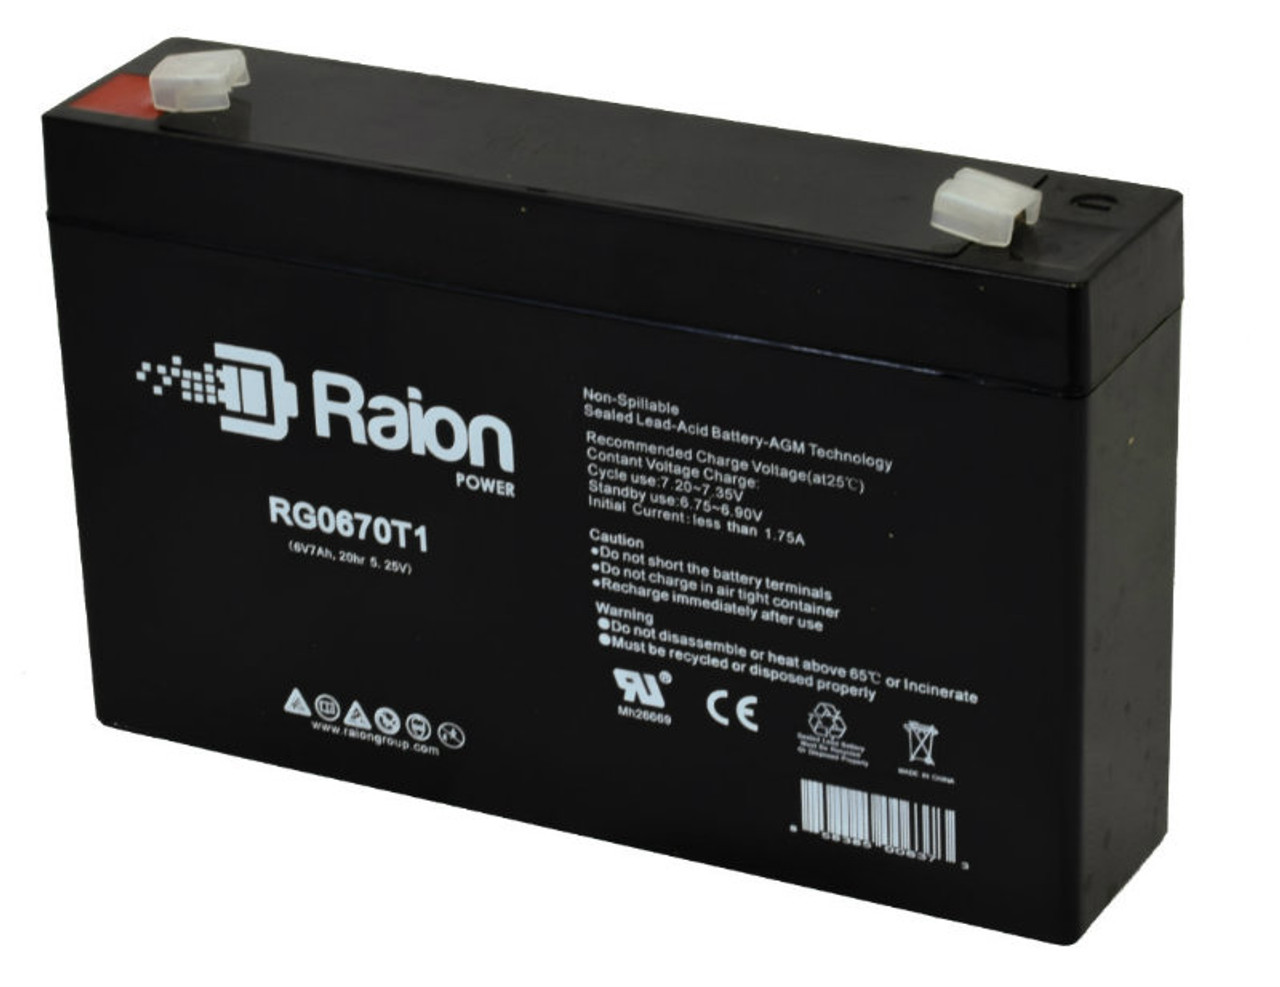 Raion Power RG0670T1 6V 7Ah Replacement Battery Cartridge for Ivy Biomedical System 704 ECG MONITOR medical equipment